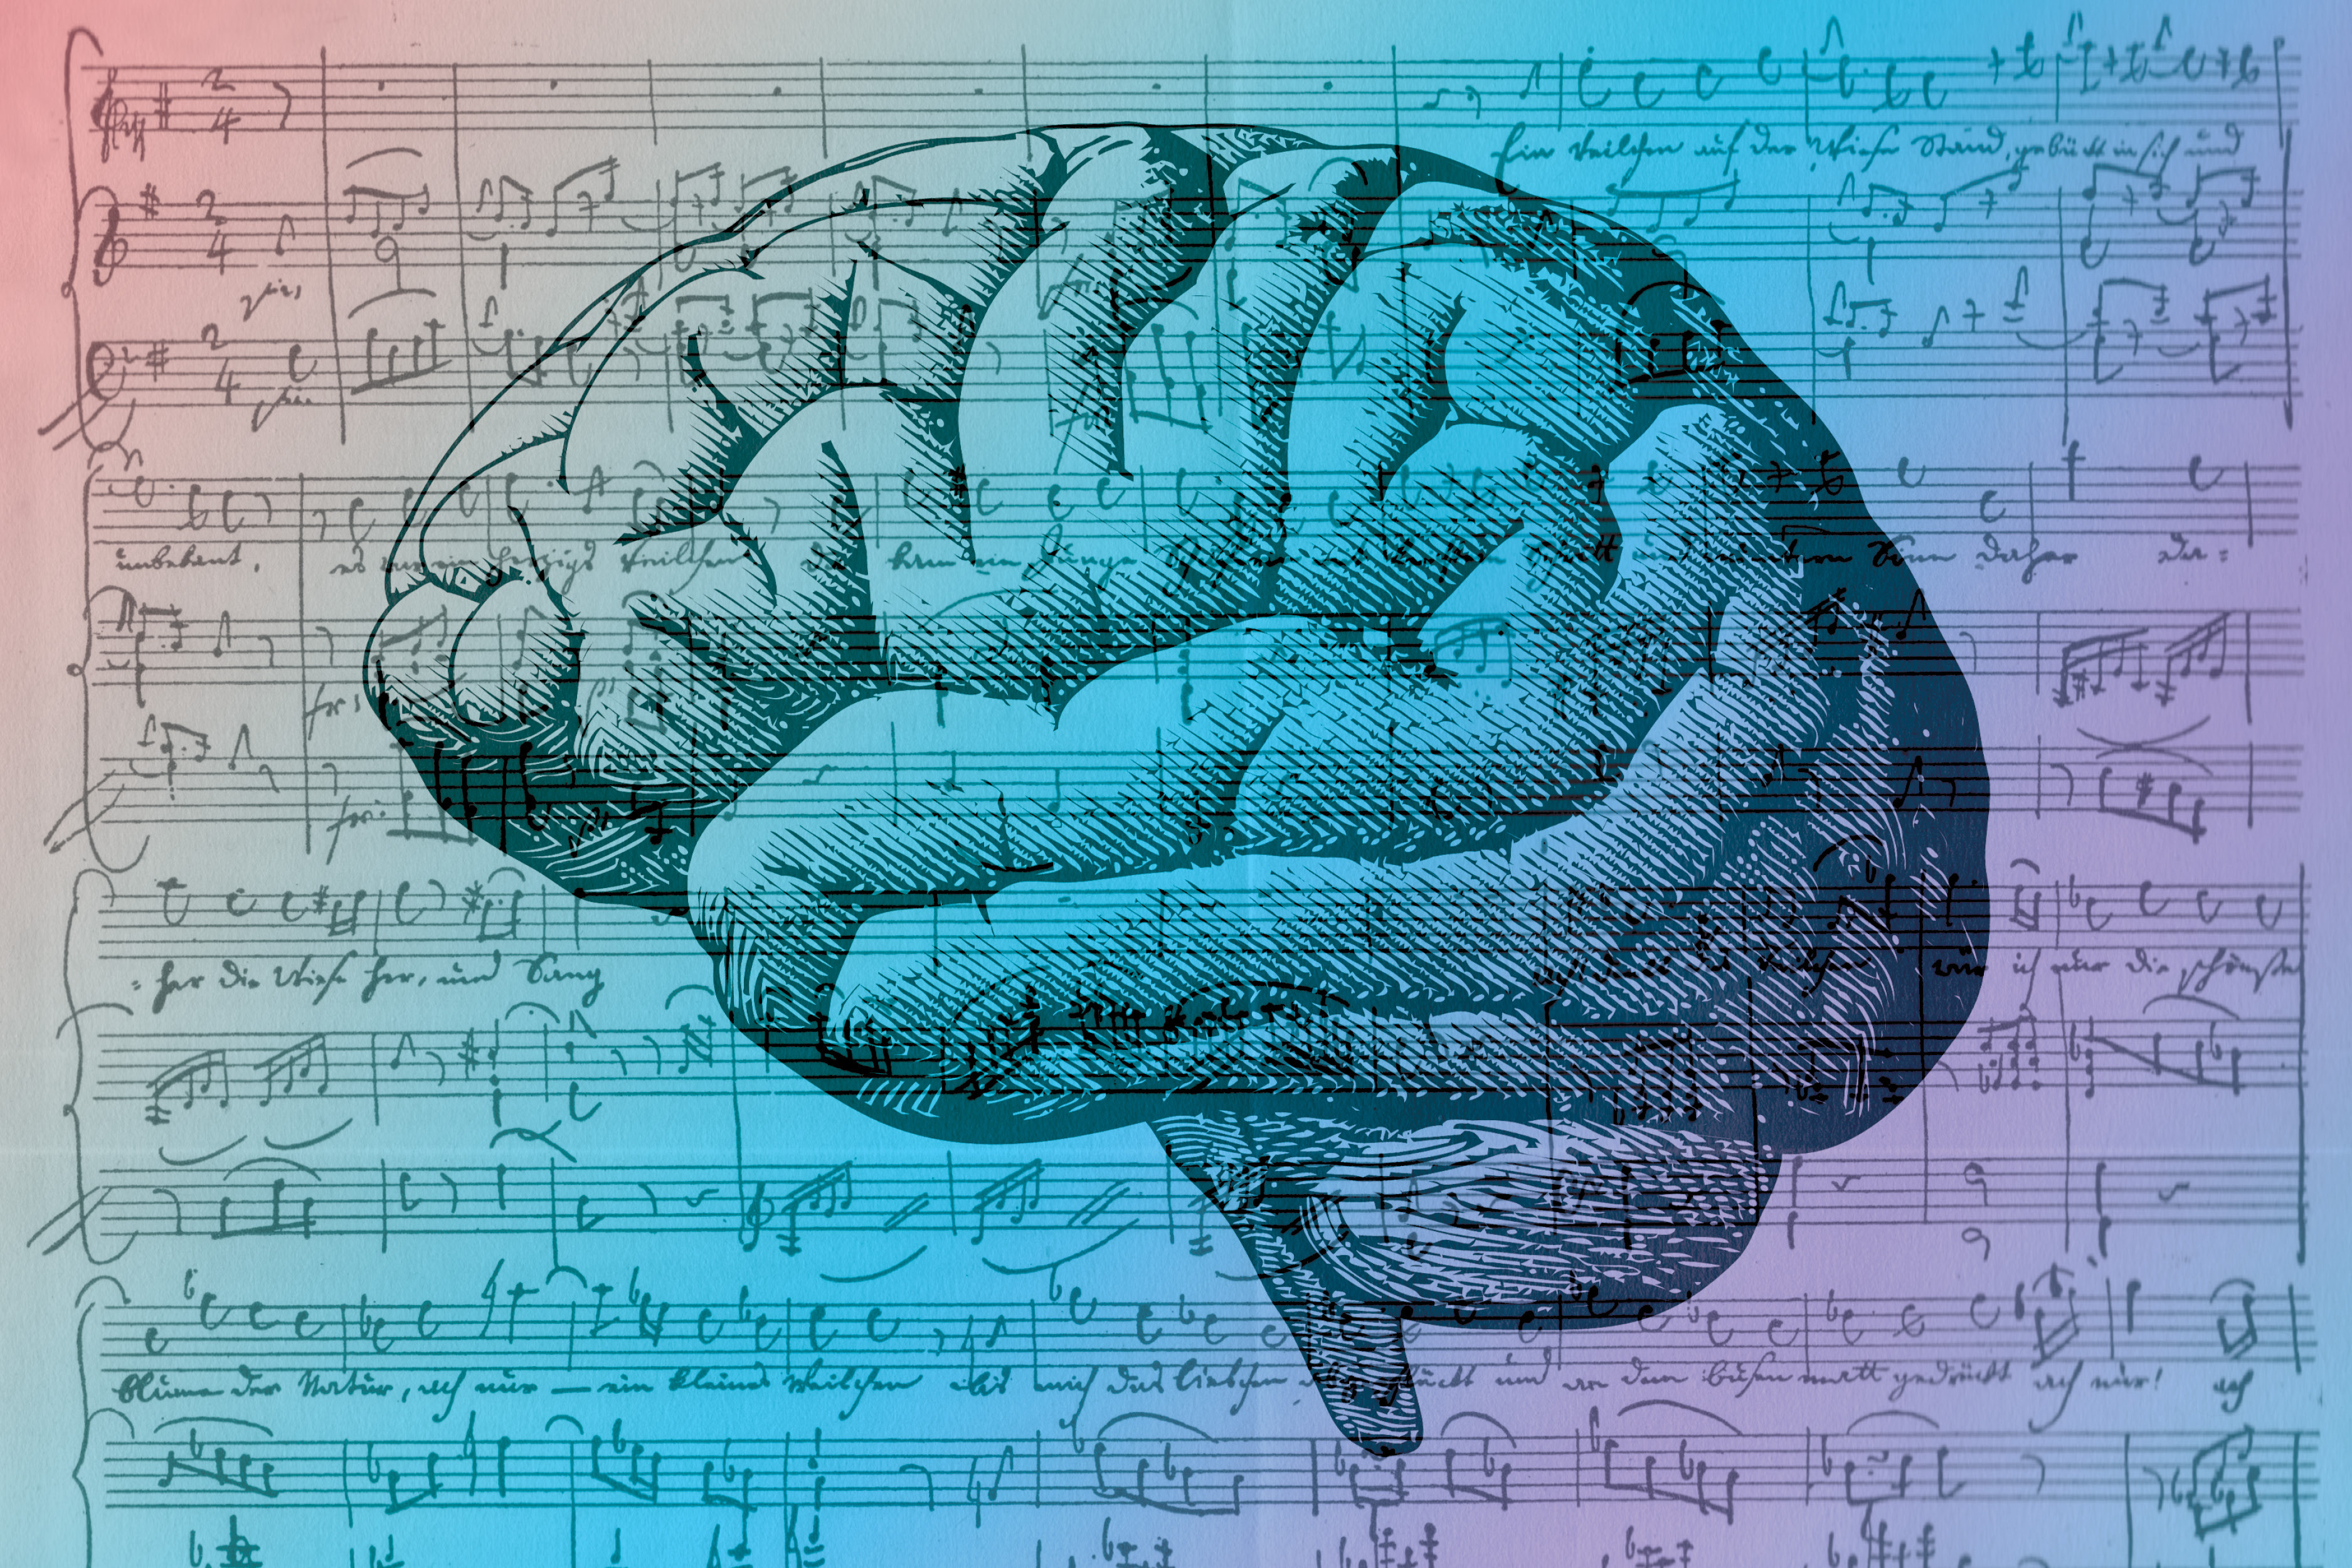 IV. The Impact of Music on Memory Retention